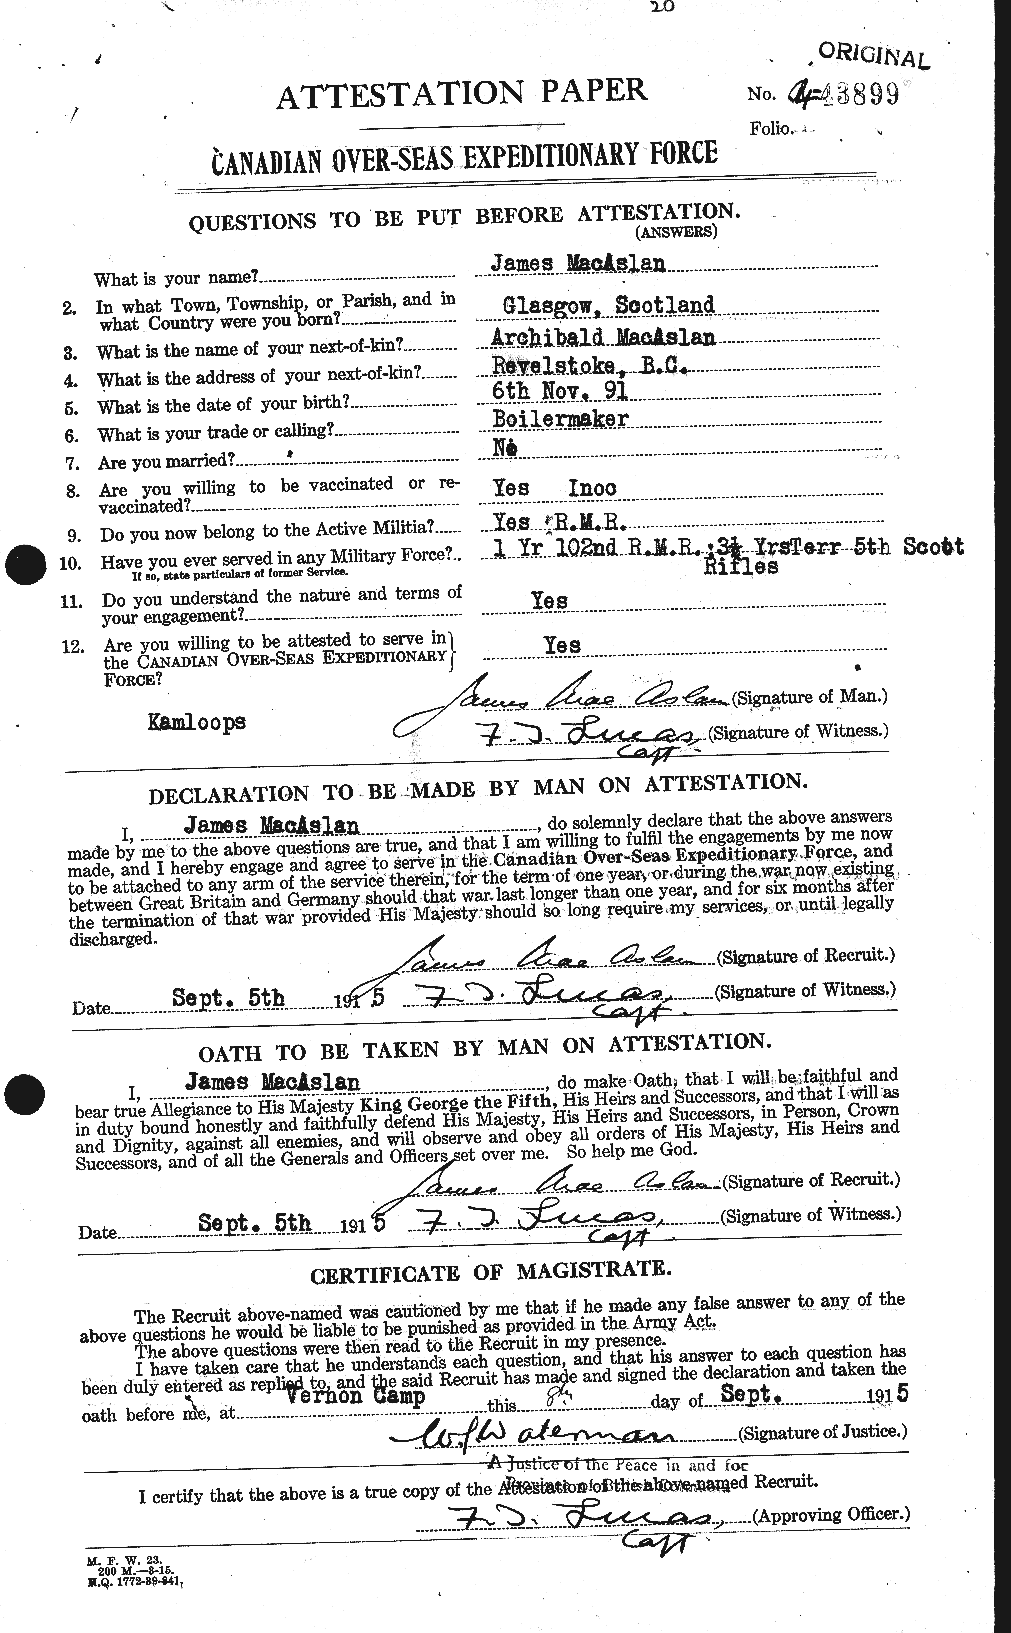 Personnel Records of the First World War - CEF 130538a